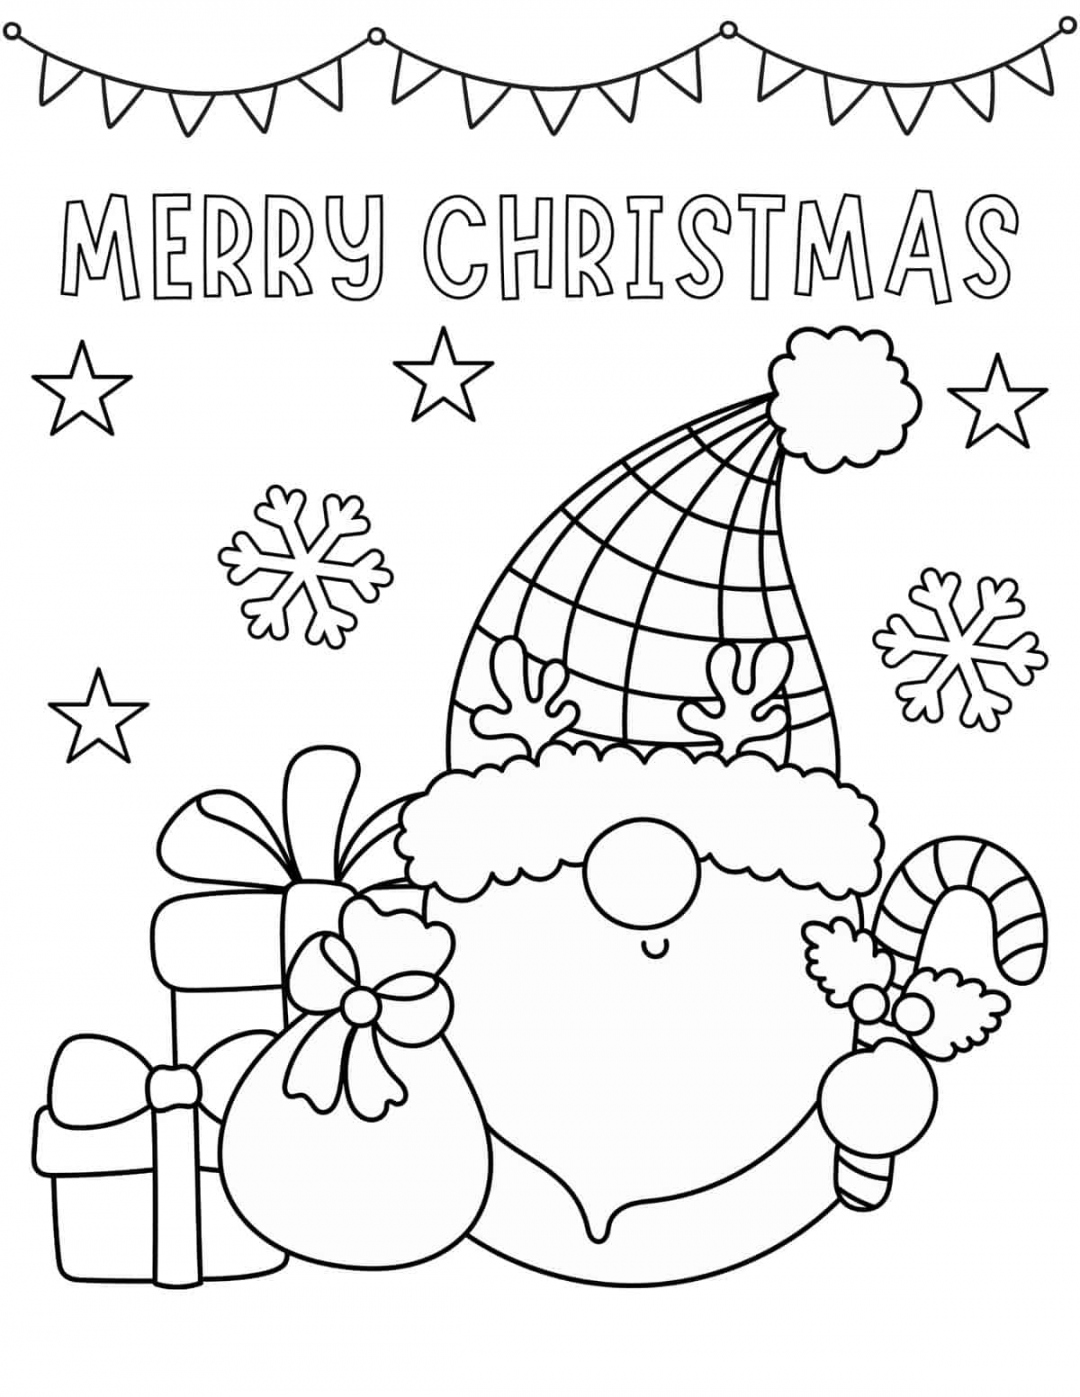 Free Christmas Coloring Pages for Kids - Prudent Penny Pincher - FREE Printables - Free Printable Christmas Gnome Coloring Page